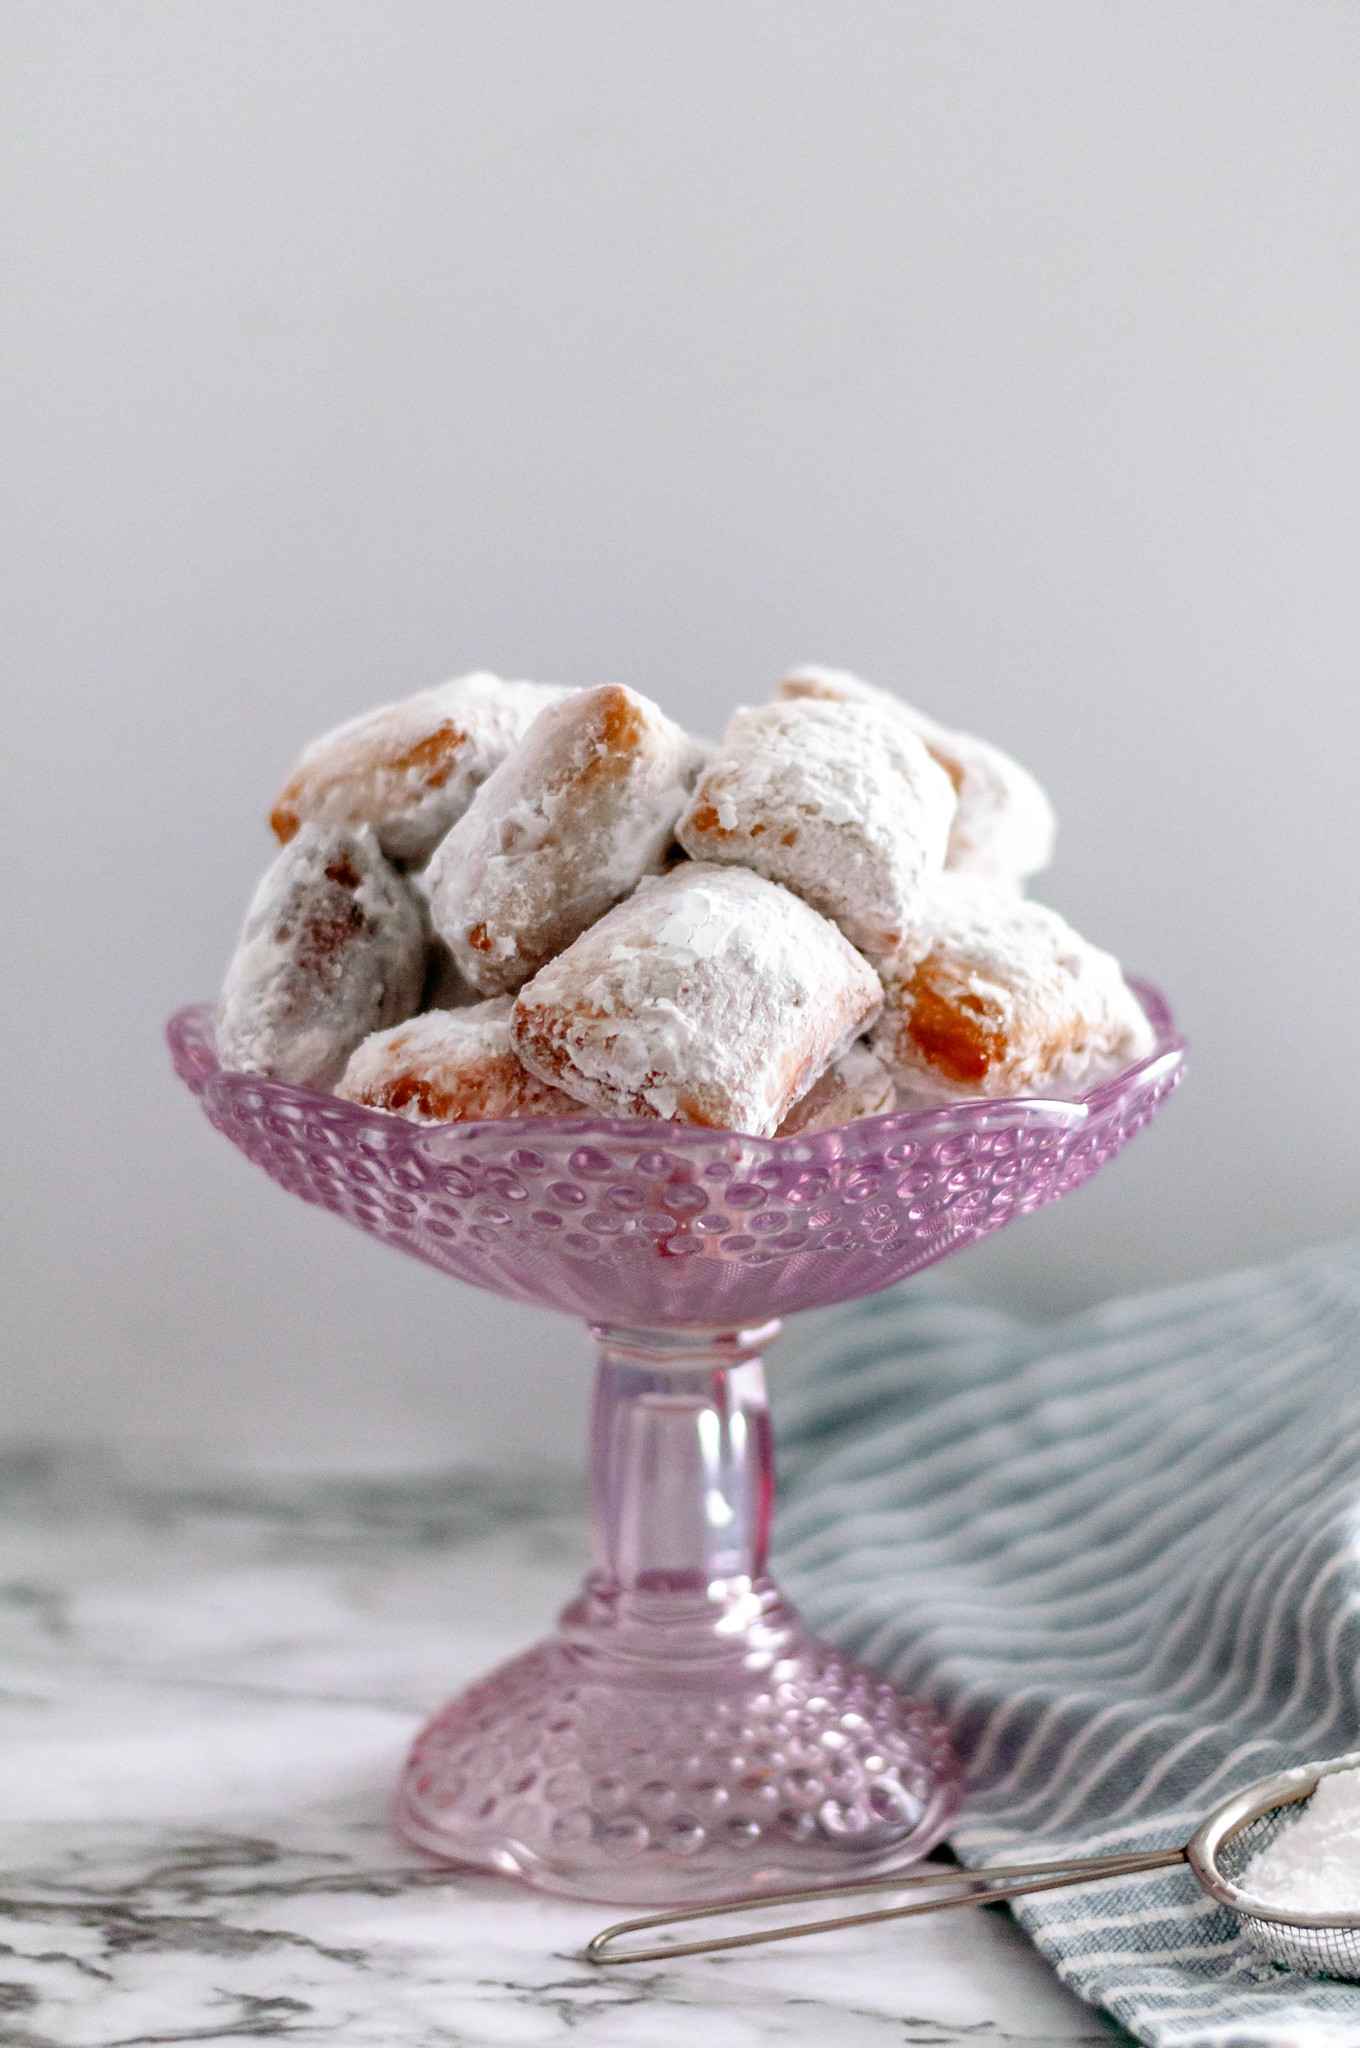 We're talking Homemade Beignets for Let's Catch Up this month.